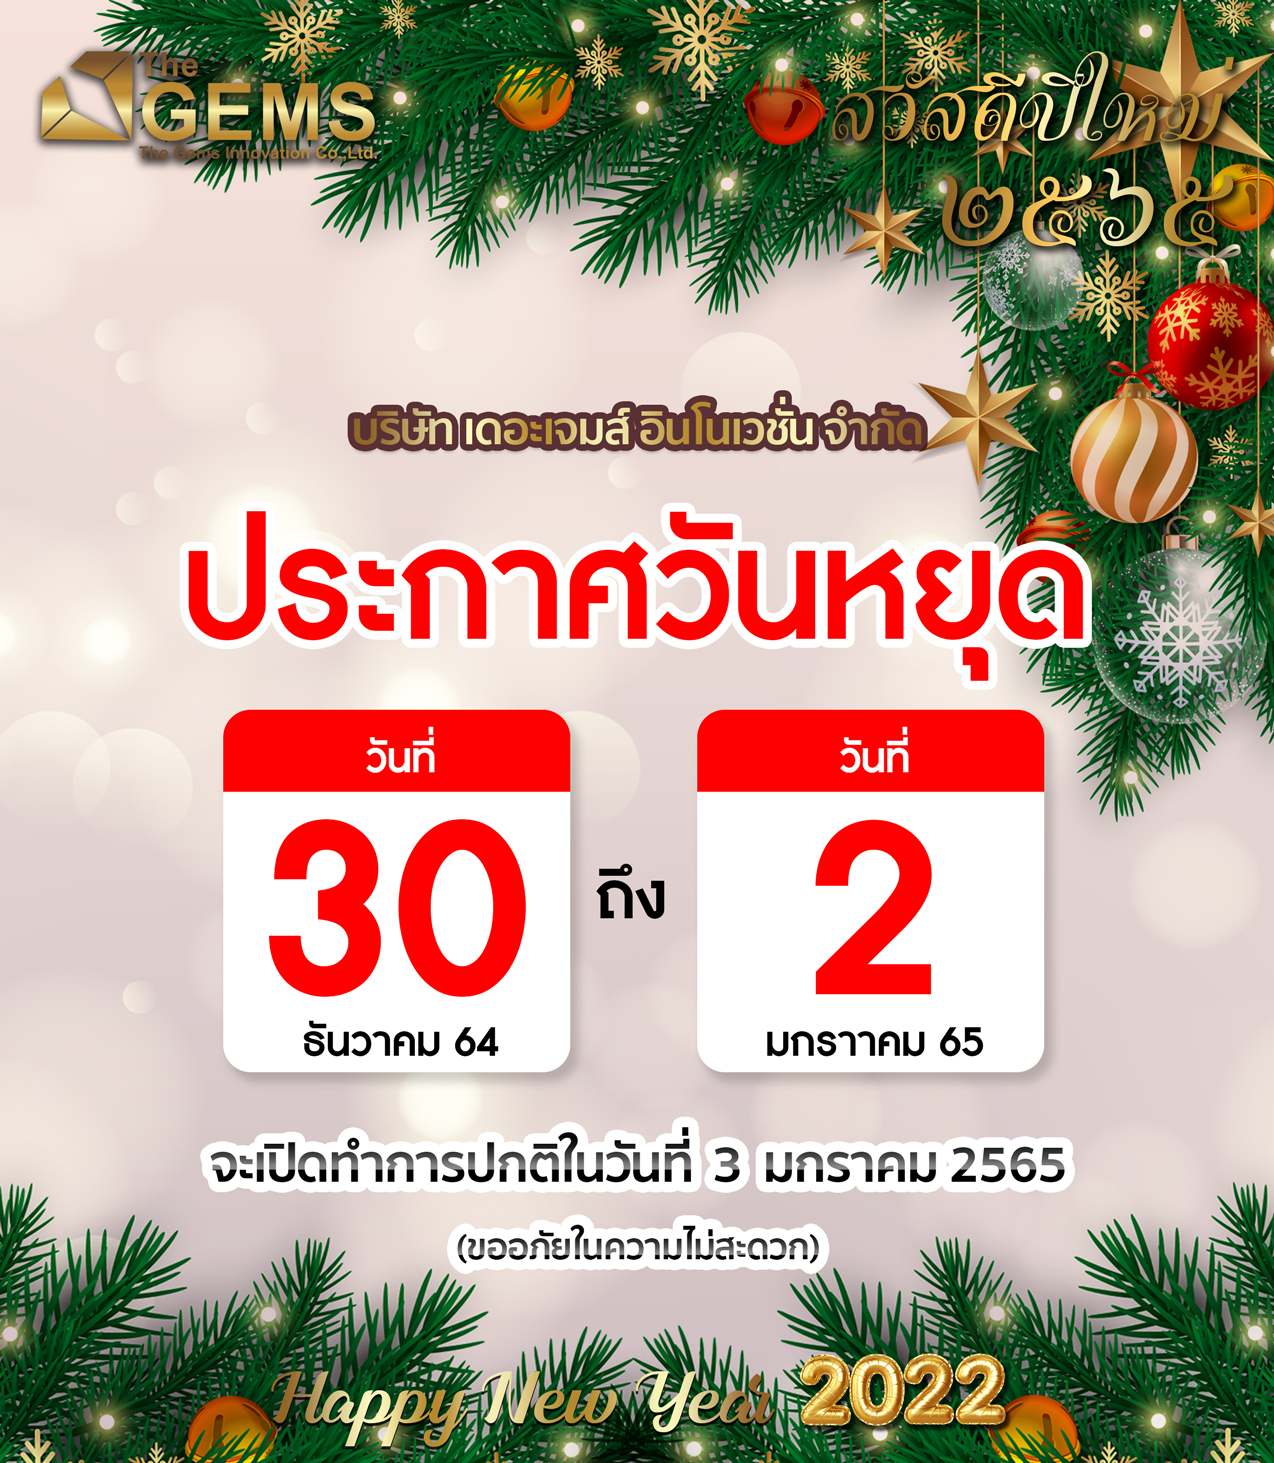 https://www.thegems.co.th/agent/images/front_news/ประกาศวันหยุด64.png?_t=1640574902